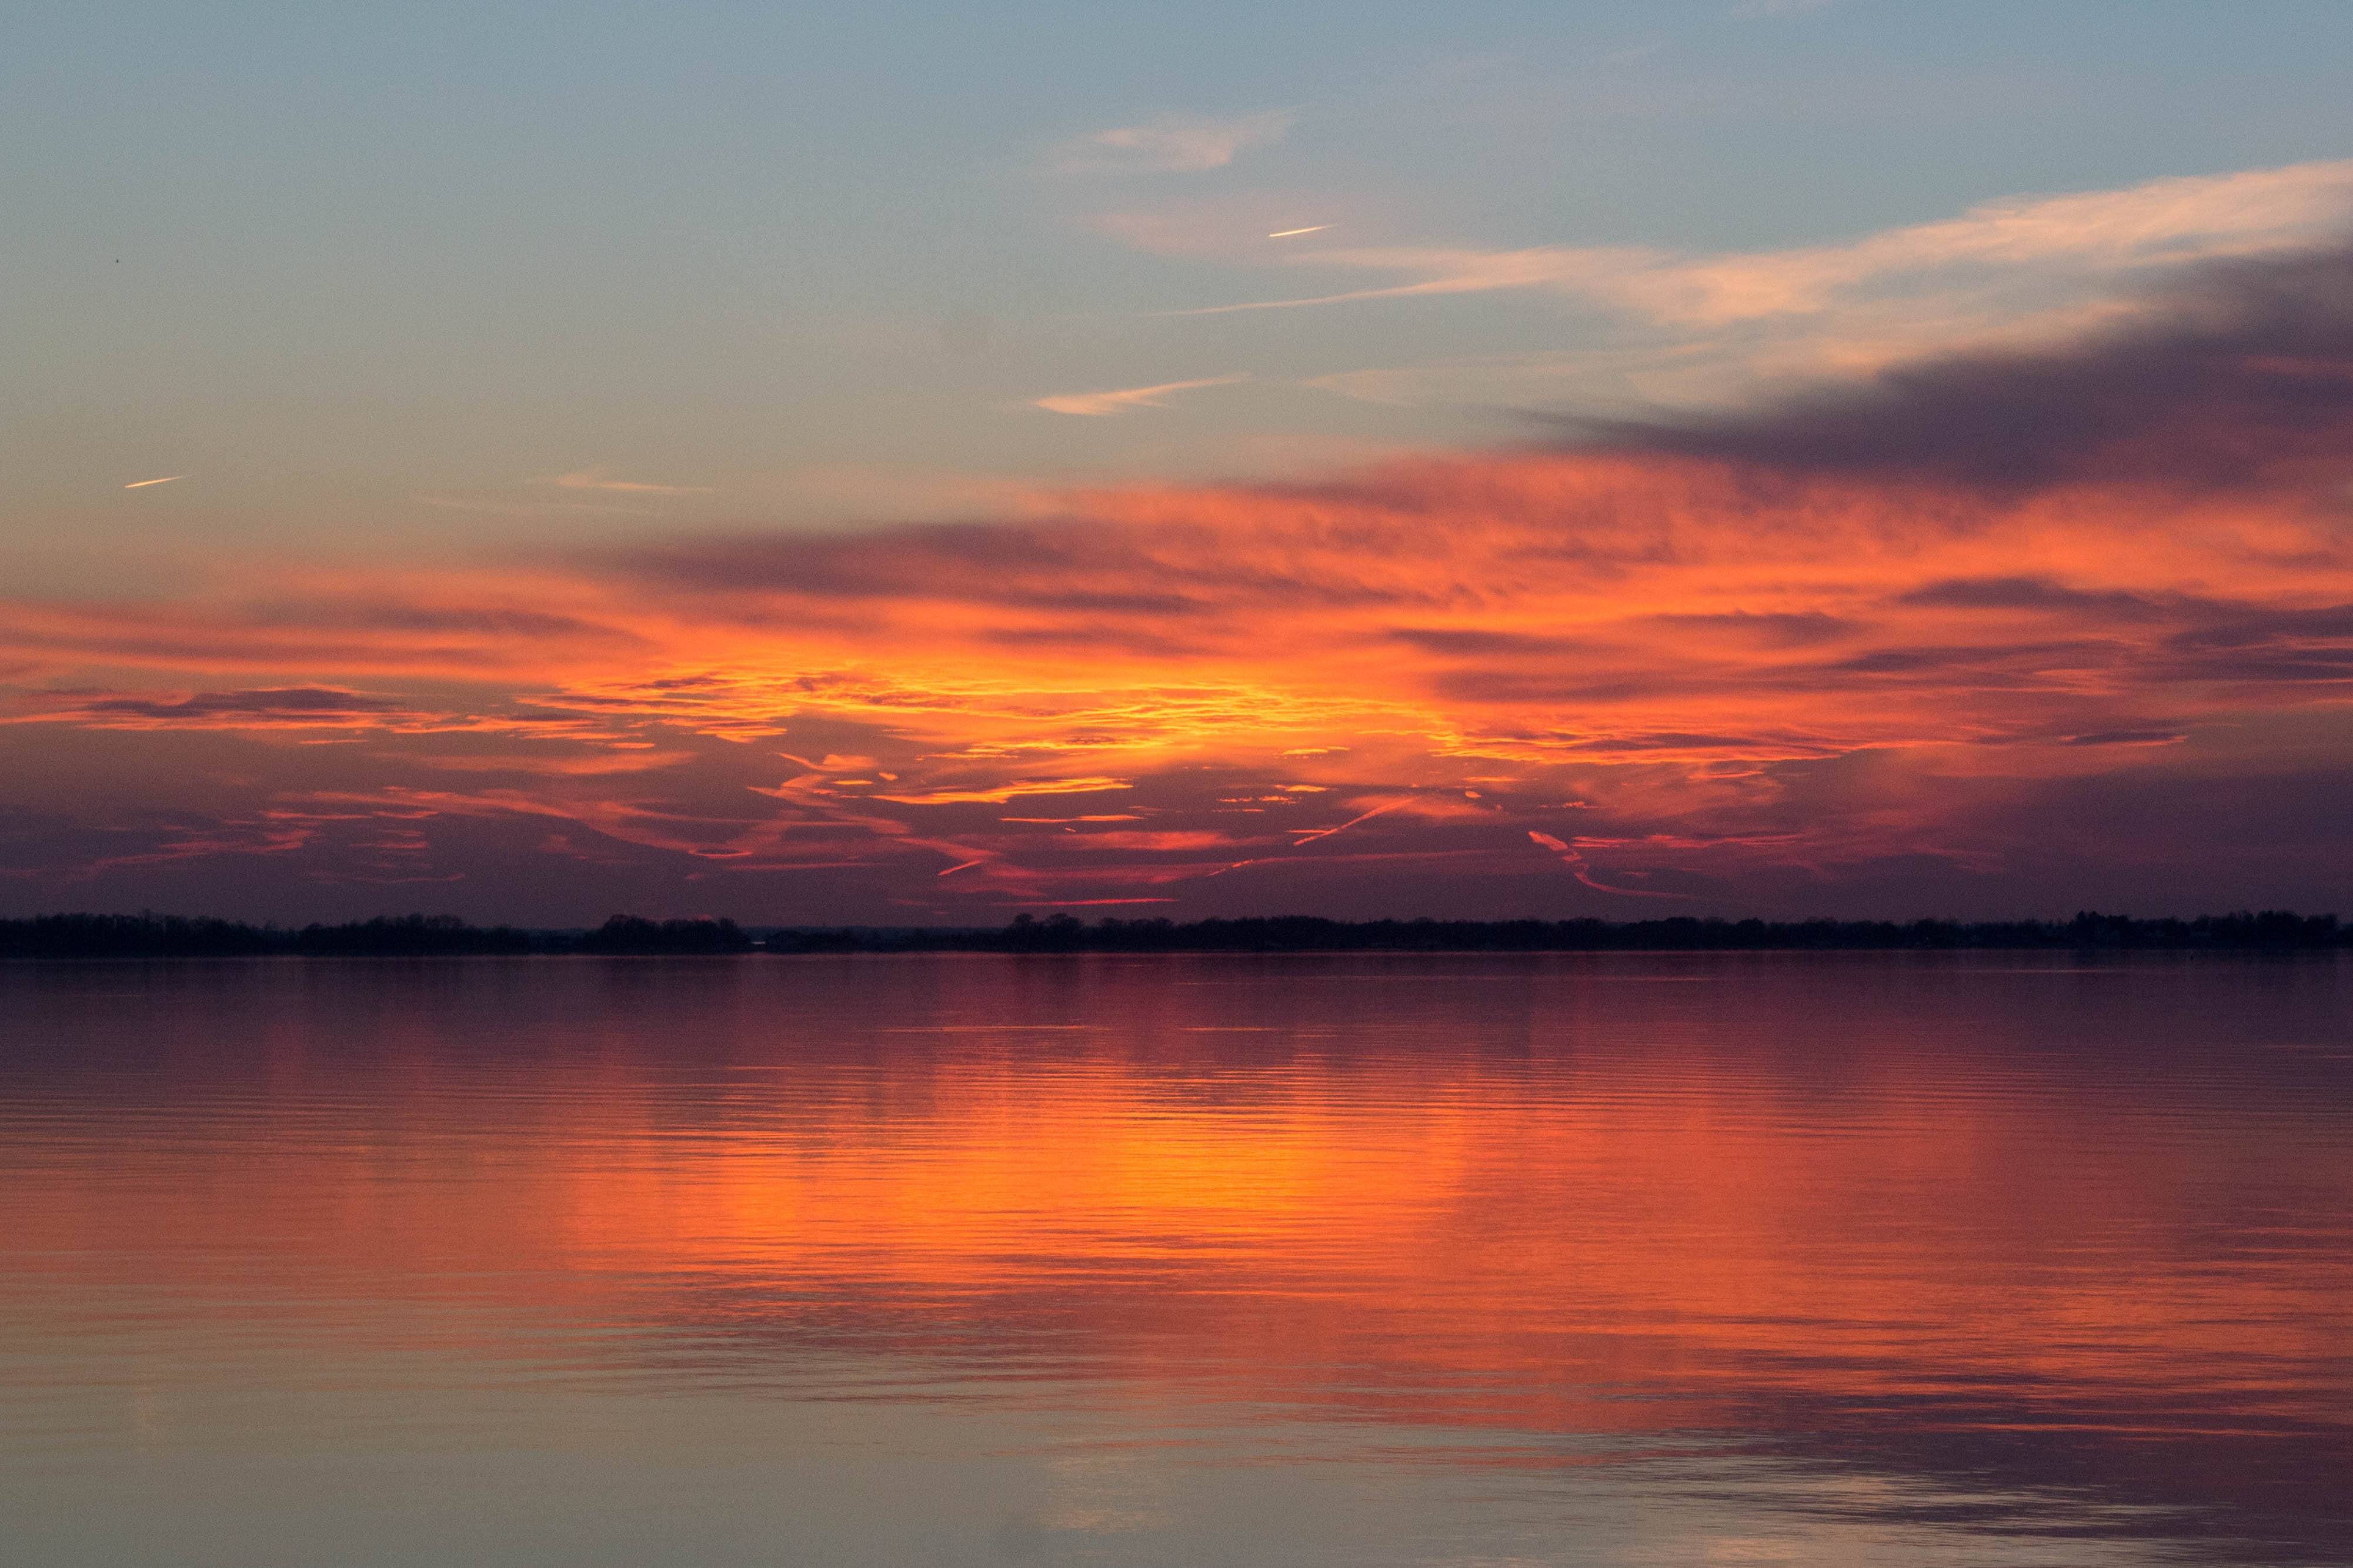 sunset, chesapeake bay, water, maryland, eastern shore, clouds